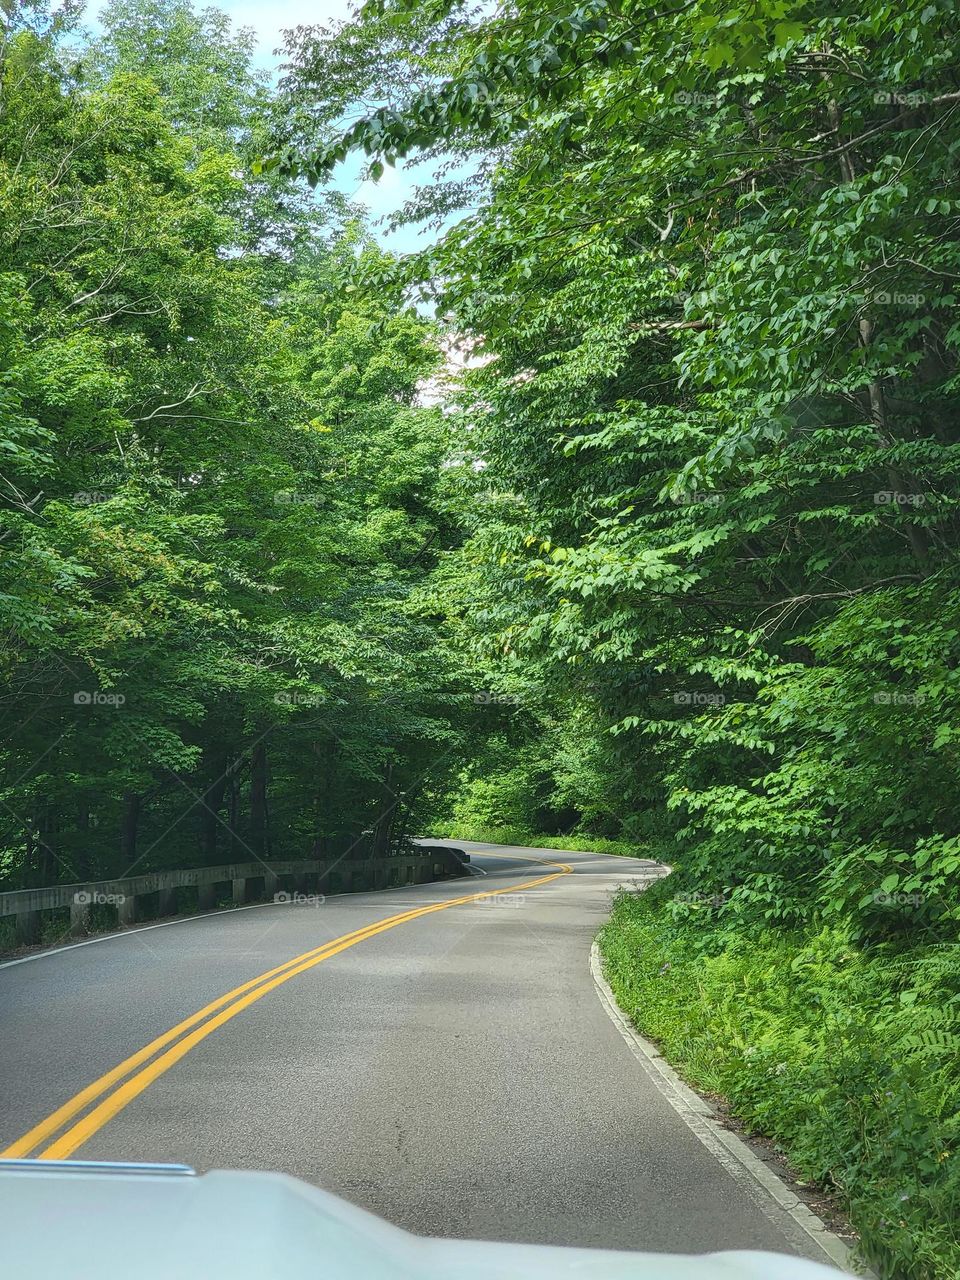 winding paved road leading into a green forest